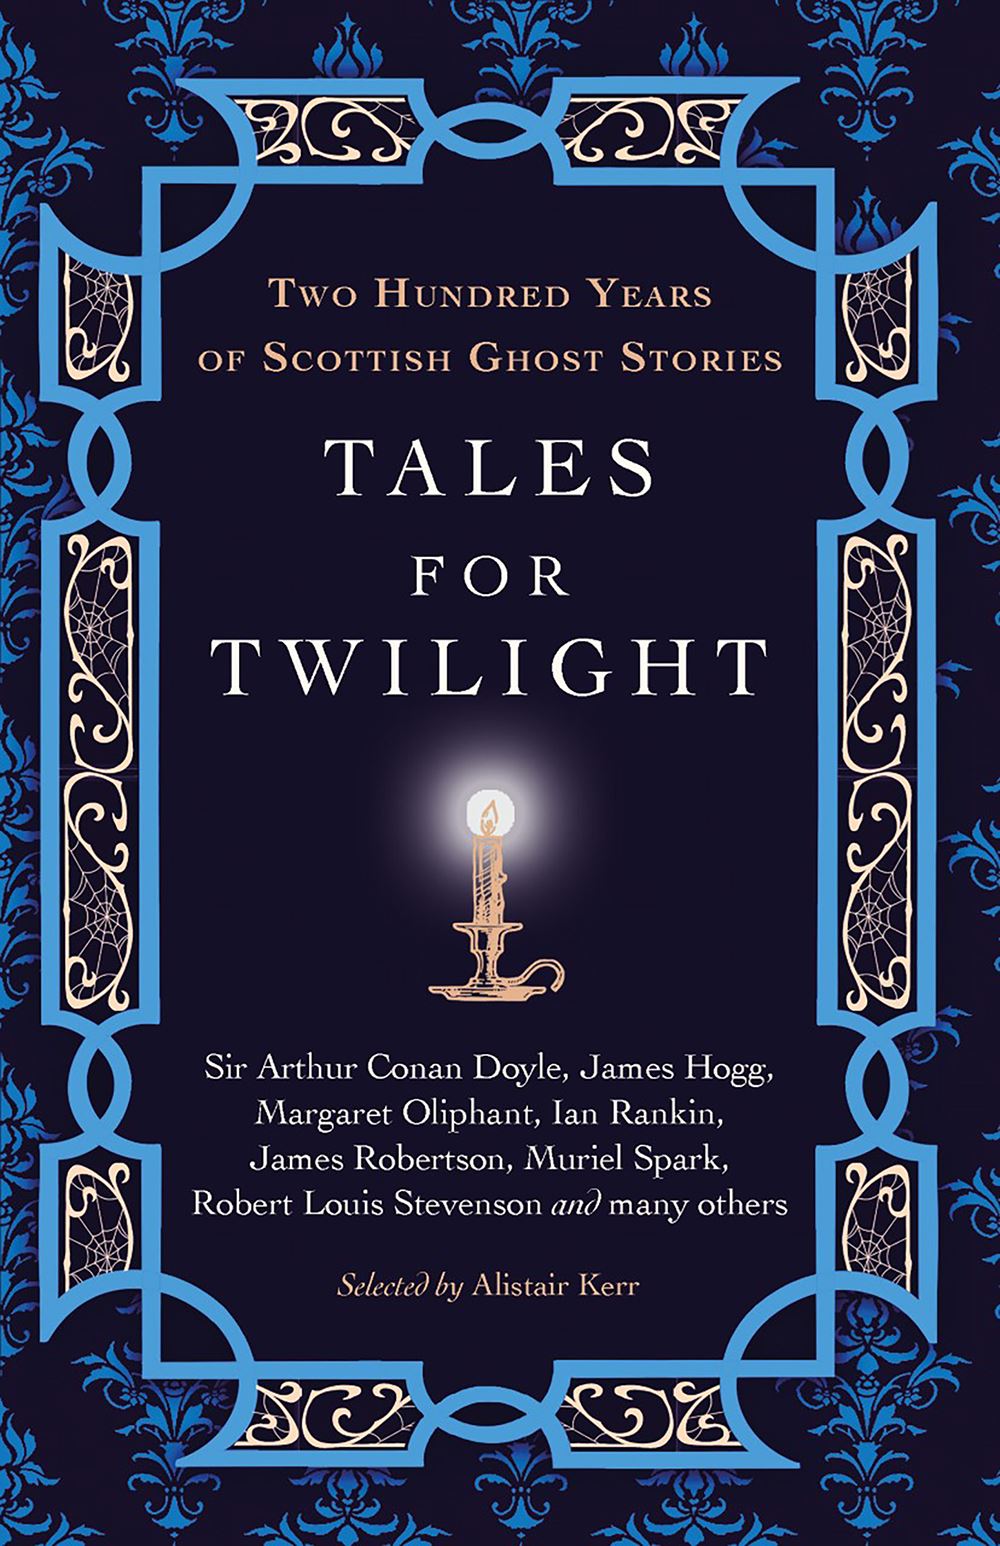 Tales For Twilight - Scottish Ghost Stories